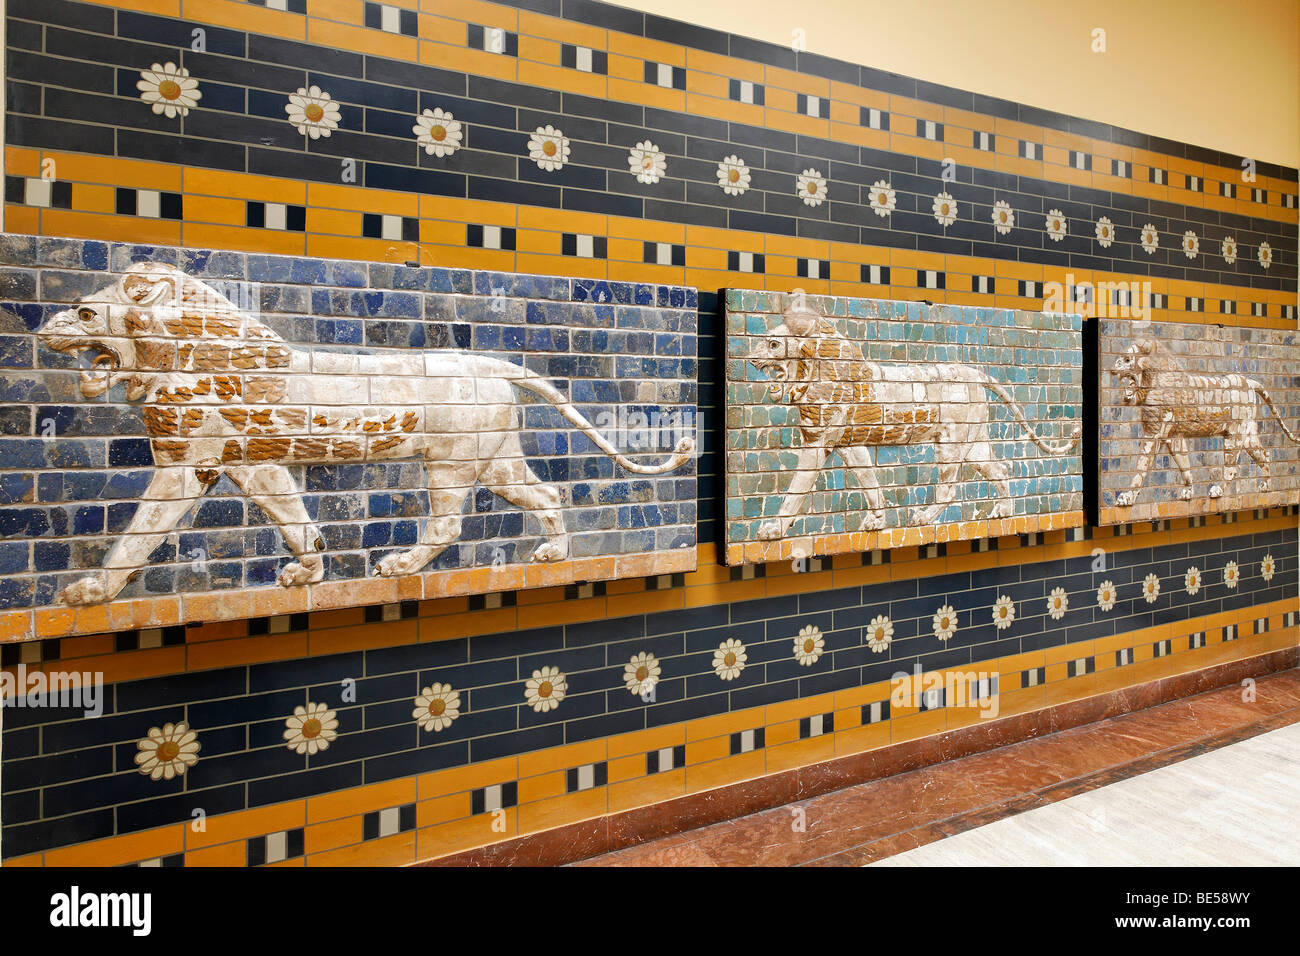 Three lions, brick relief from the Babylonian Ishtar Gate, Archeological Museum, Topkapi Palace, Istanbul, Turkey Stock Photo